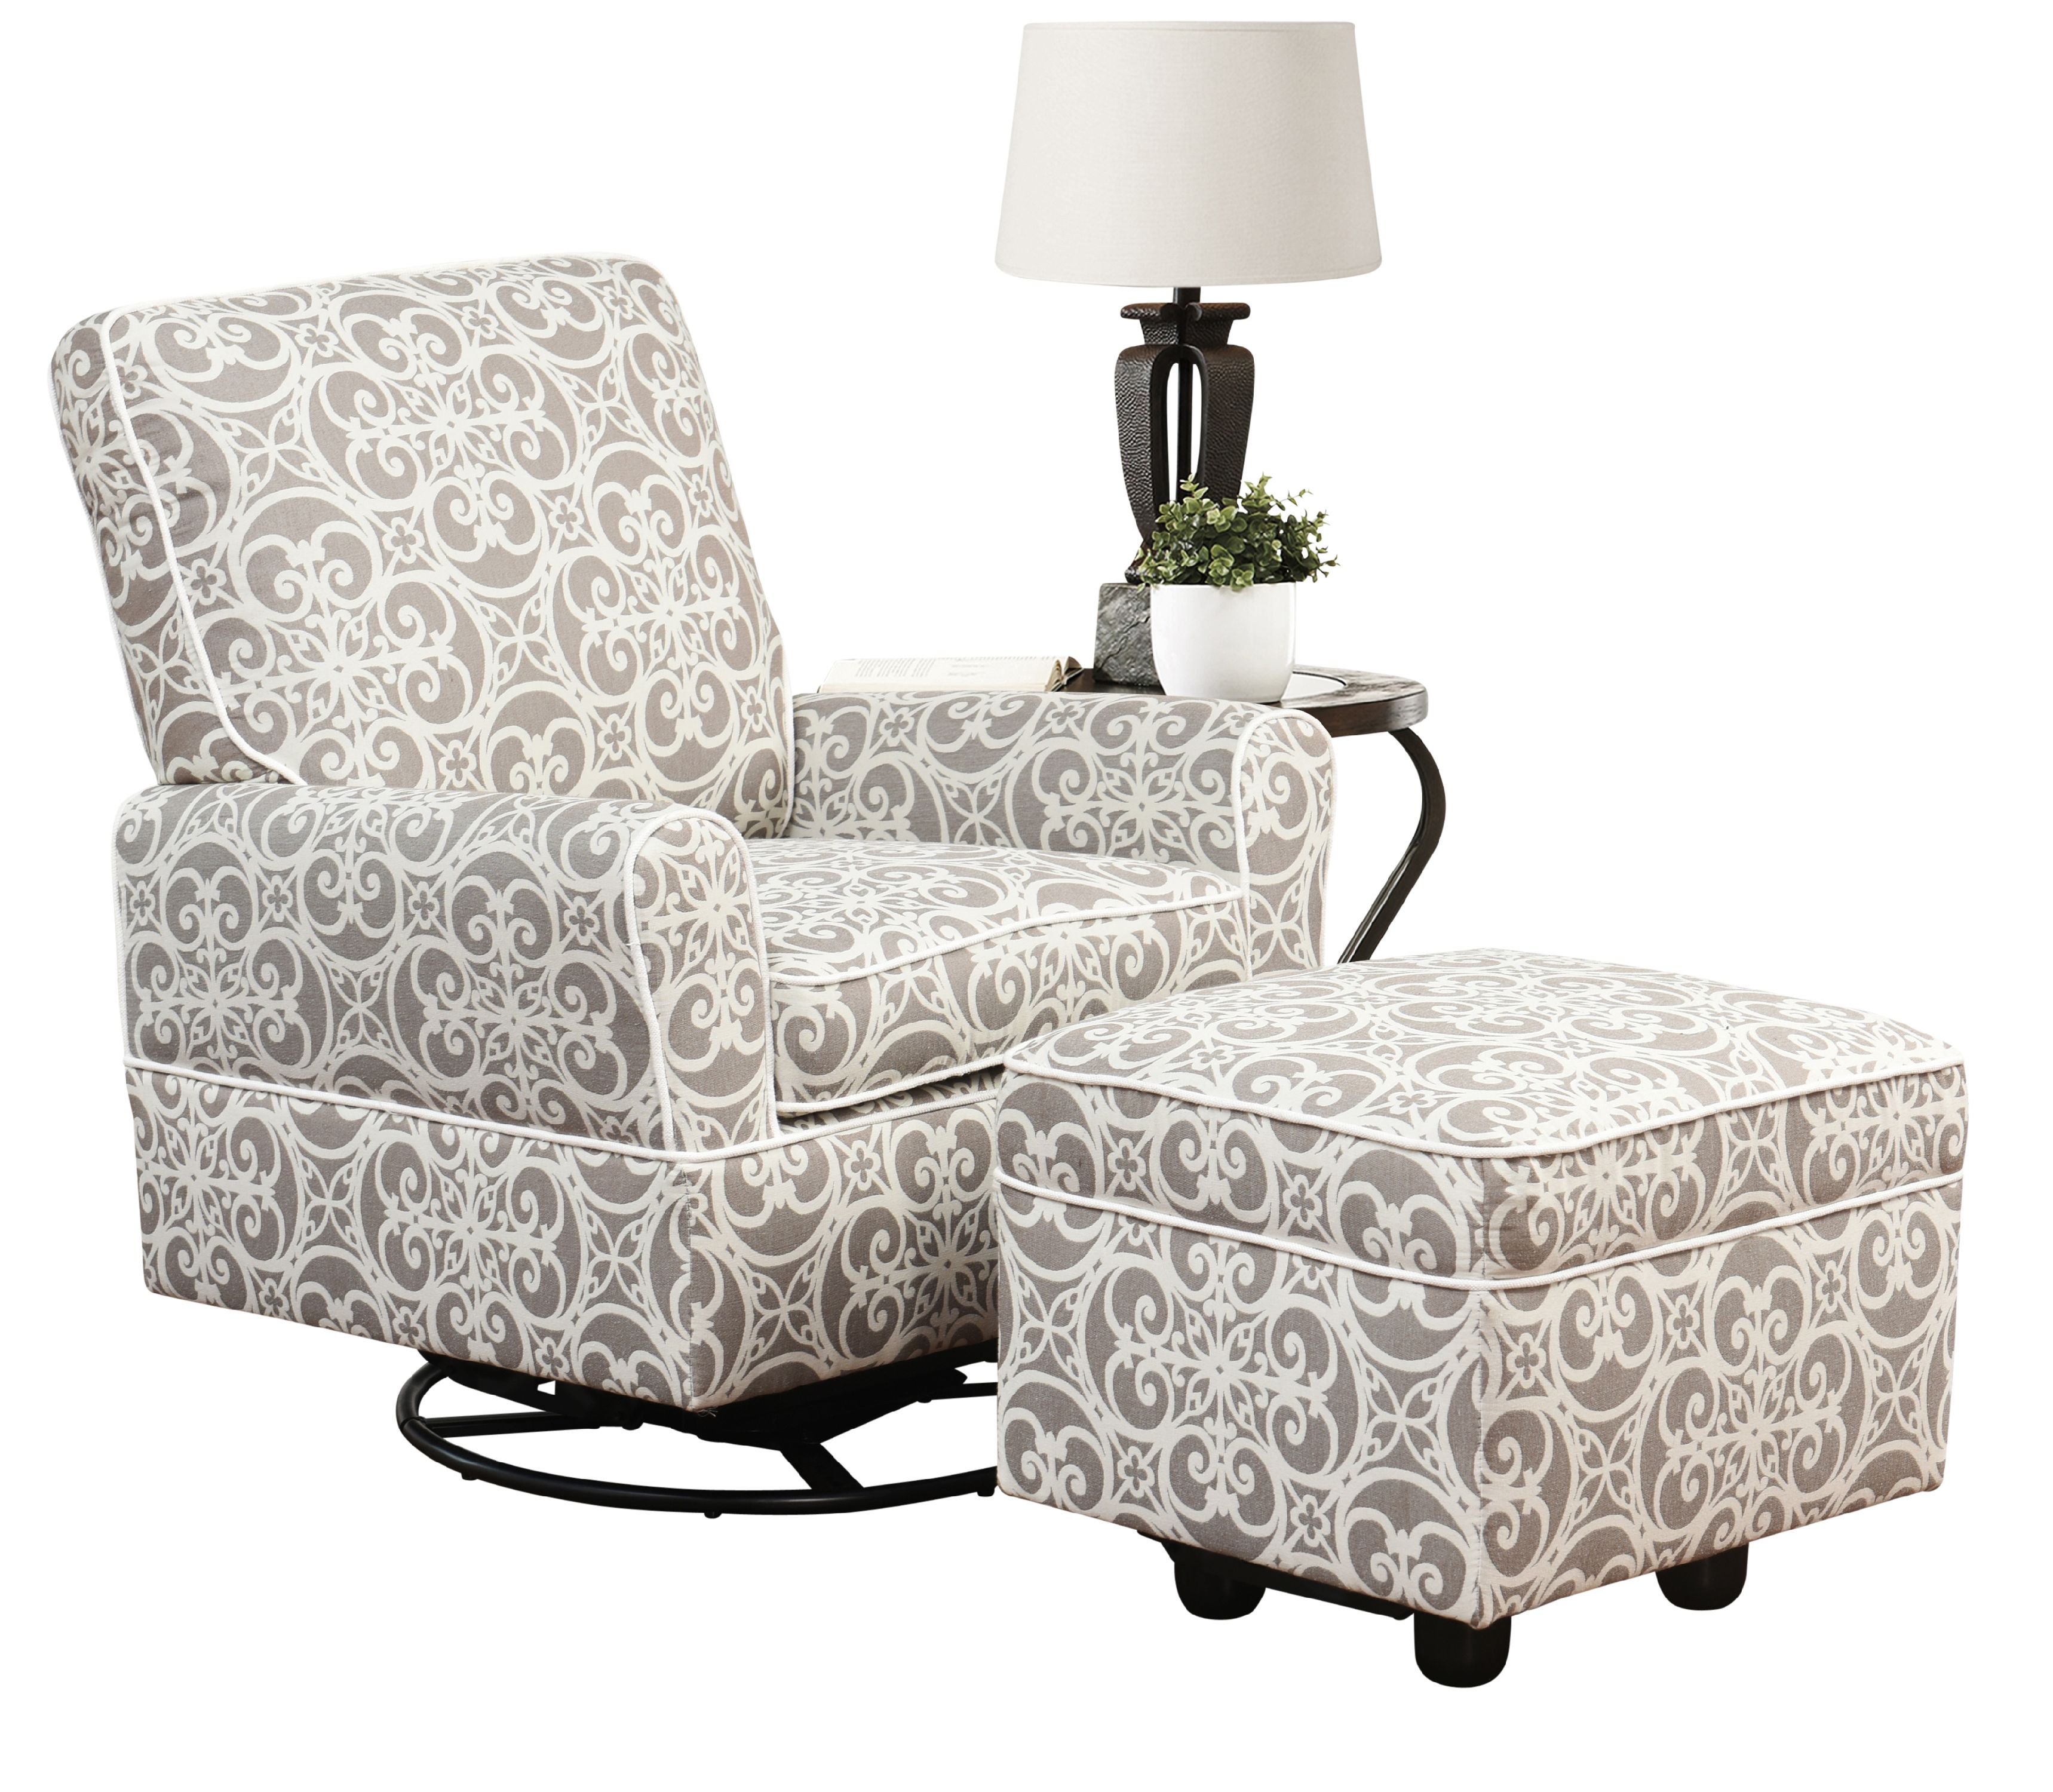 Chase Swivel Glider Chair and Gliding Ottoman - image 1 of 4